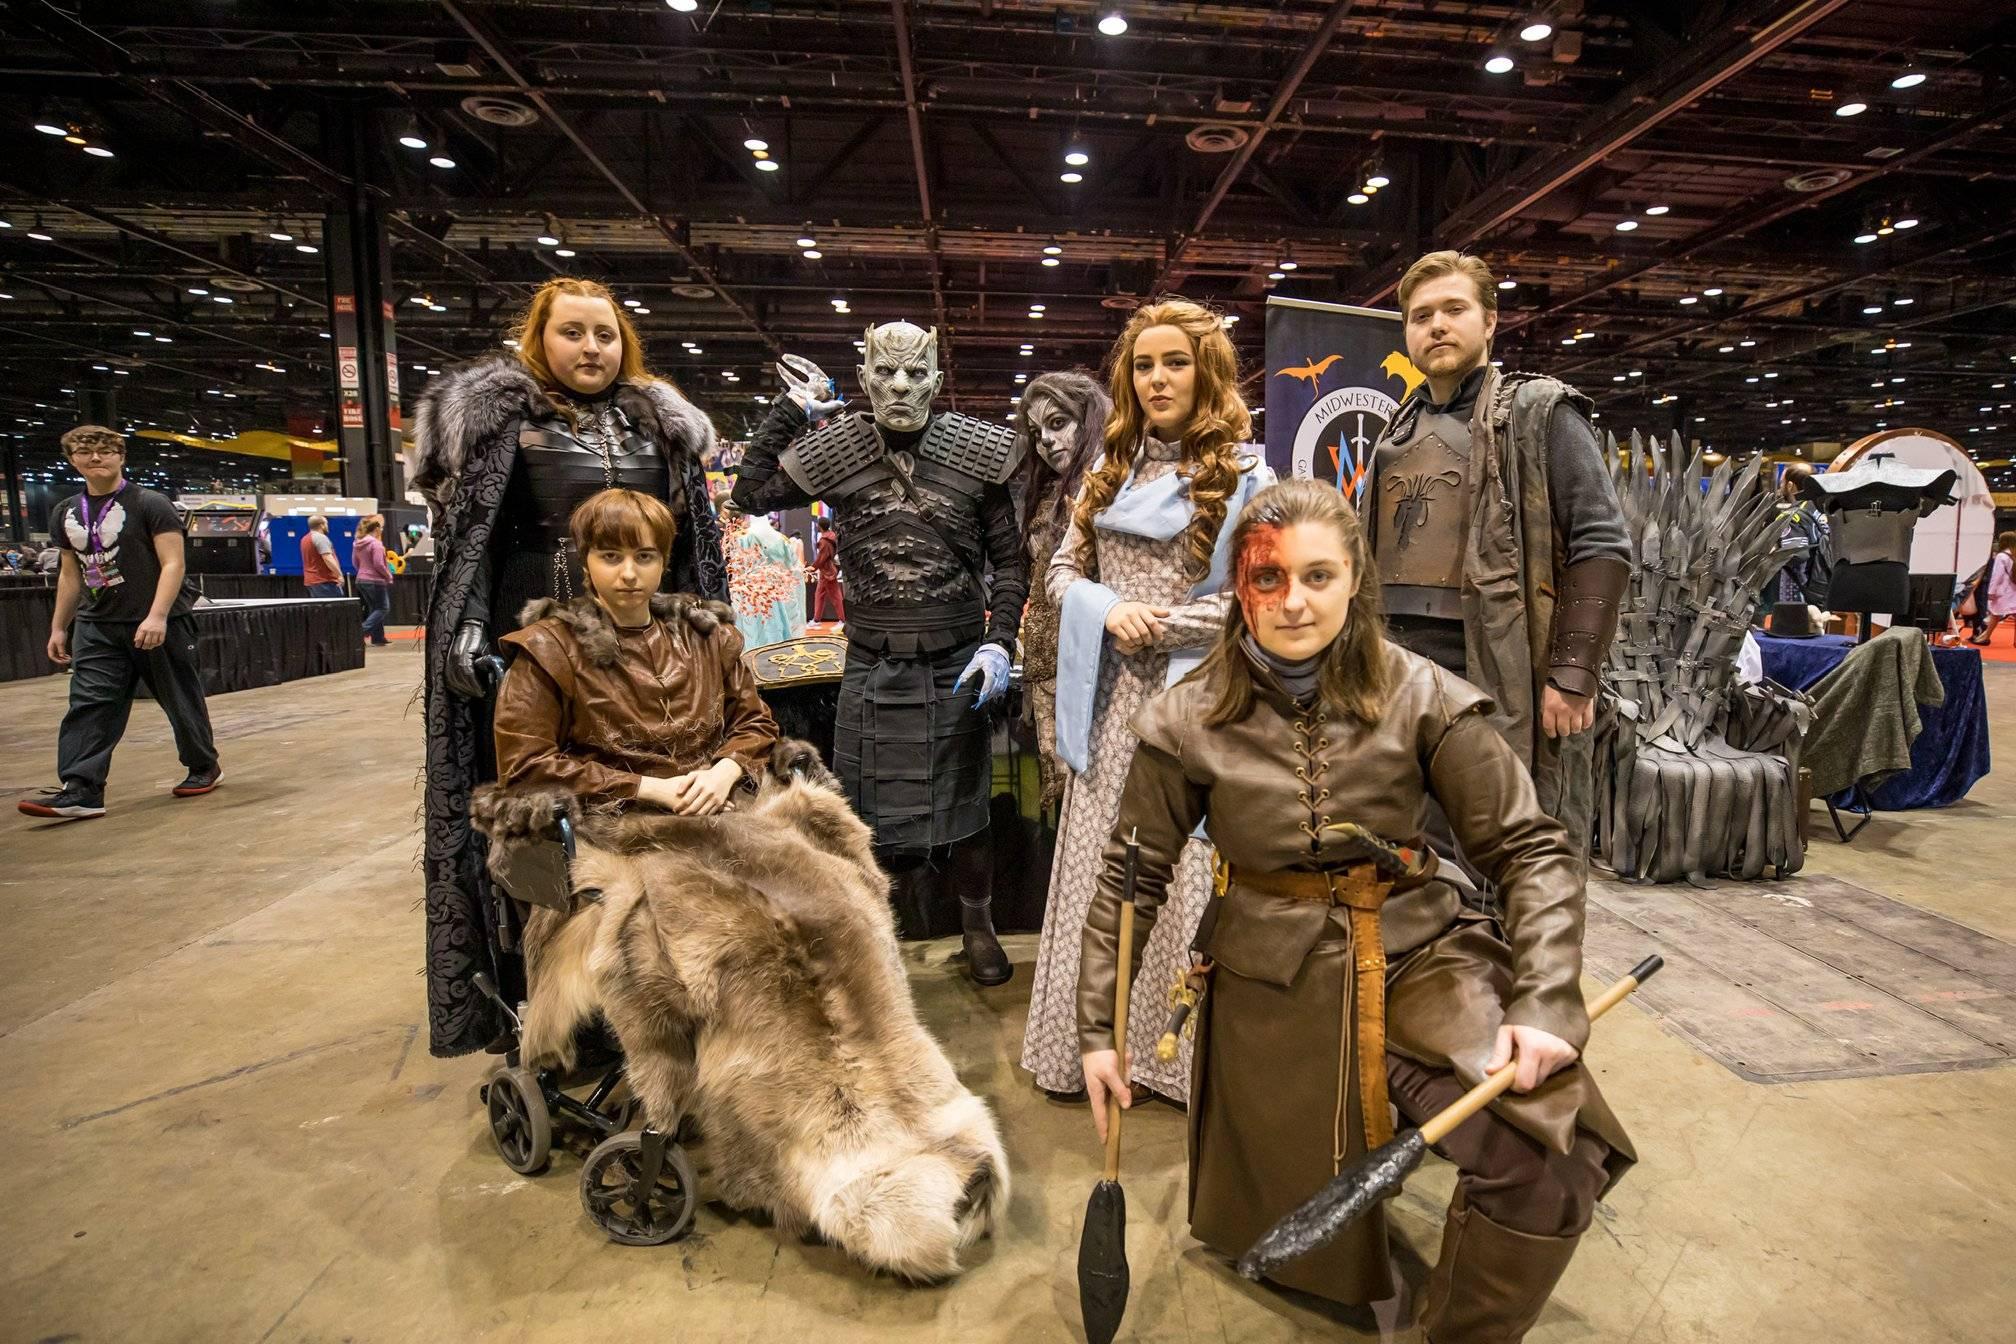 Chicago Comic & Entertainment Expo attendees dressed up as characters from “Game of Thrones” at 2020’s event. (C2E2 / Facebook)